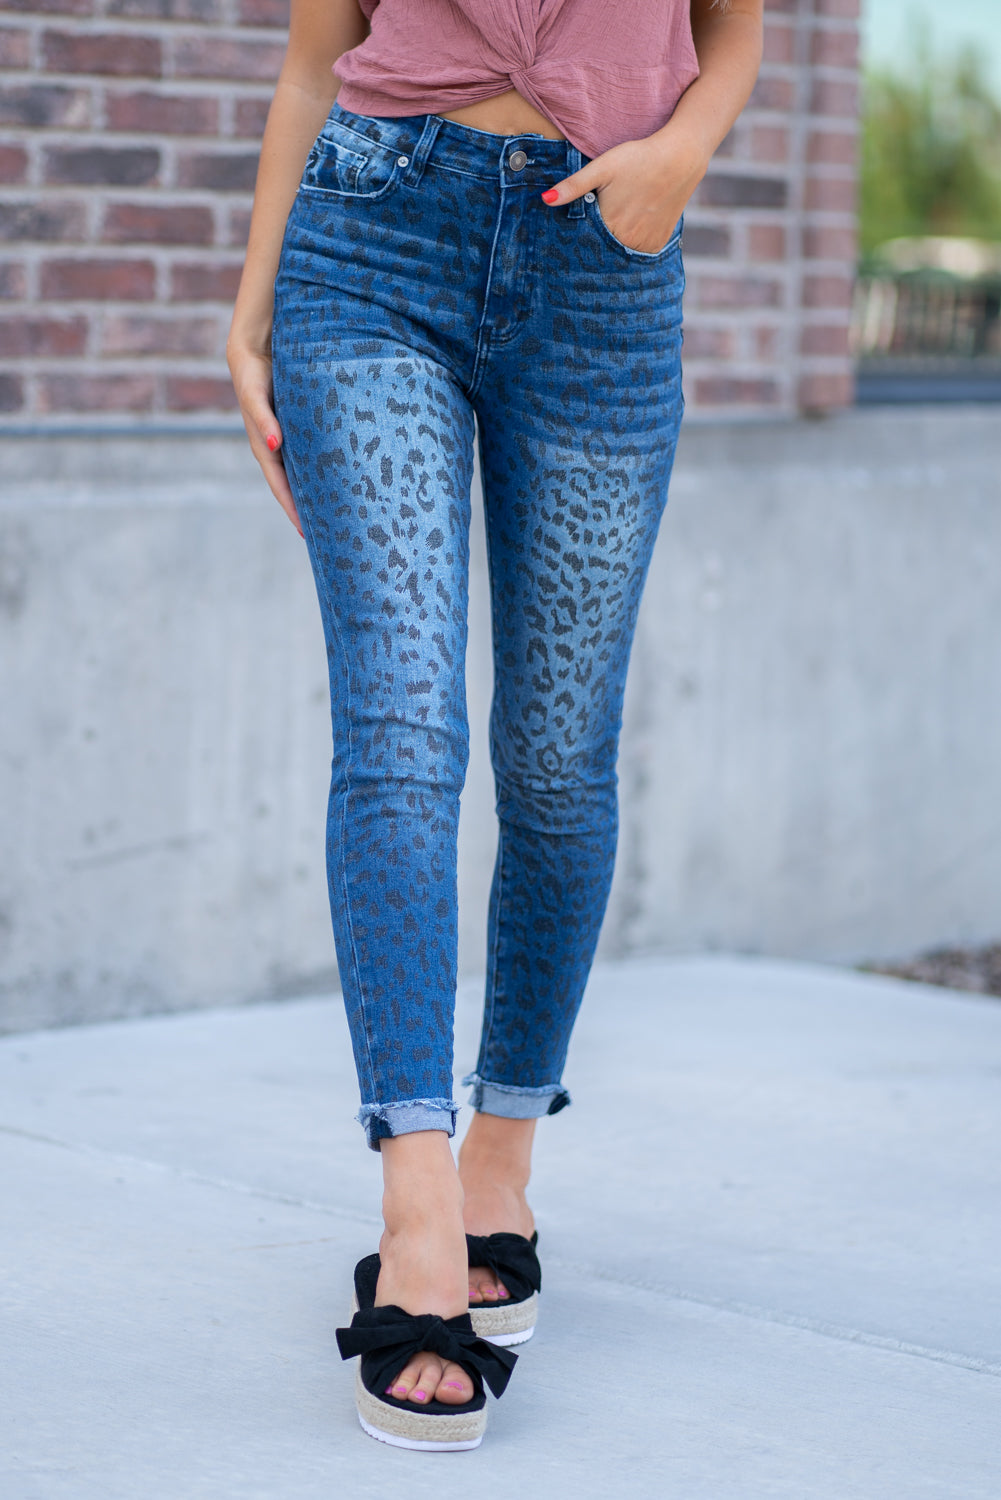 Buy Distressed Light Denim Animal Print Palazzo Wide Leg Jeans at Social  Butterfly Collection for only $ 98.00